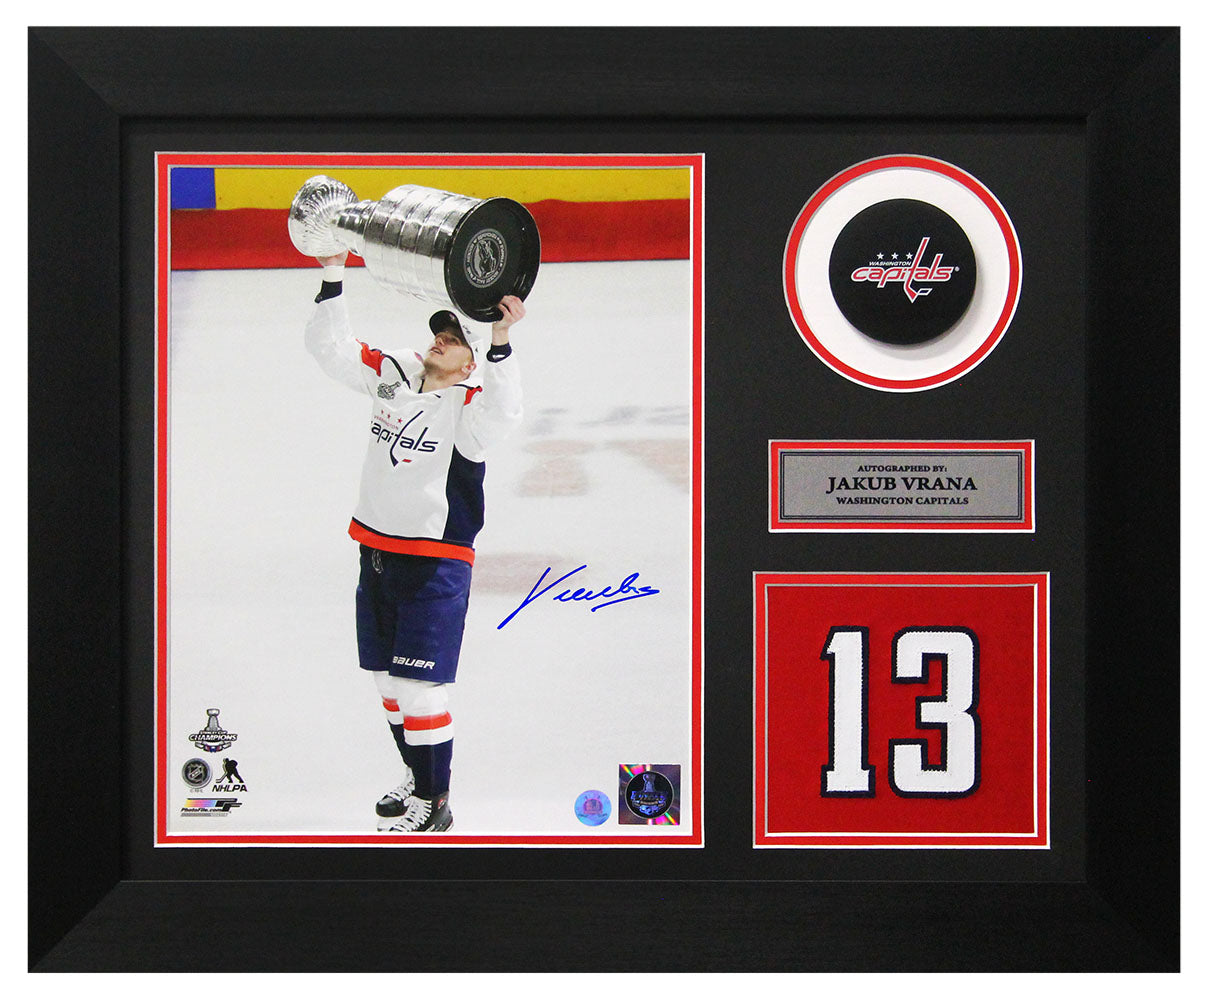 Washington Capitals Stanley Cup Champions Gear, Autographs, Buying